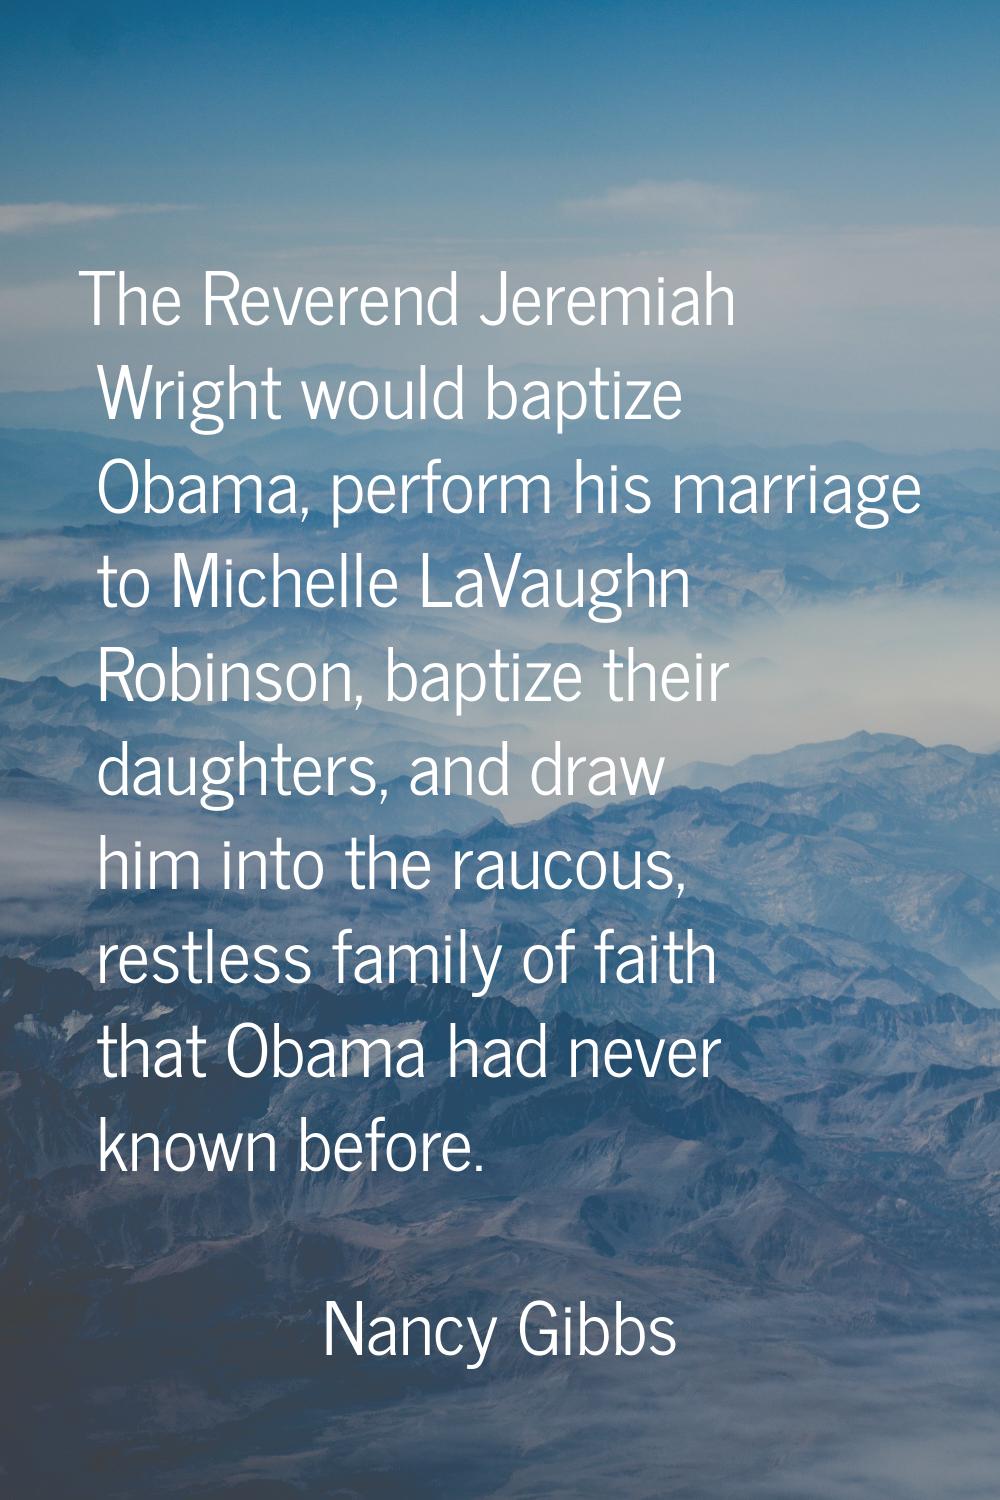 The Reverend Jeremiah Wright would baptize Obama, perform his marriage to Michelle LaVaughn Robinso